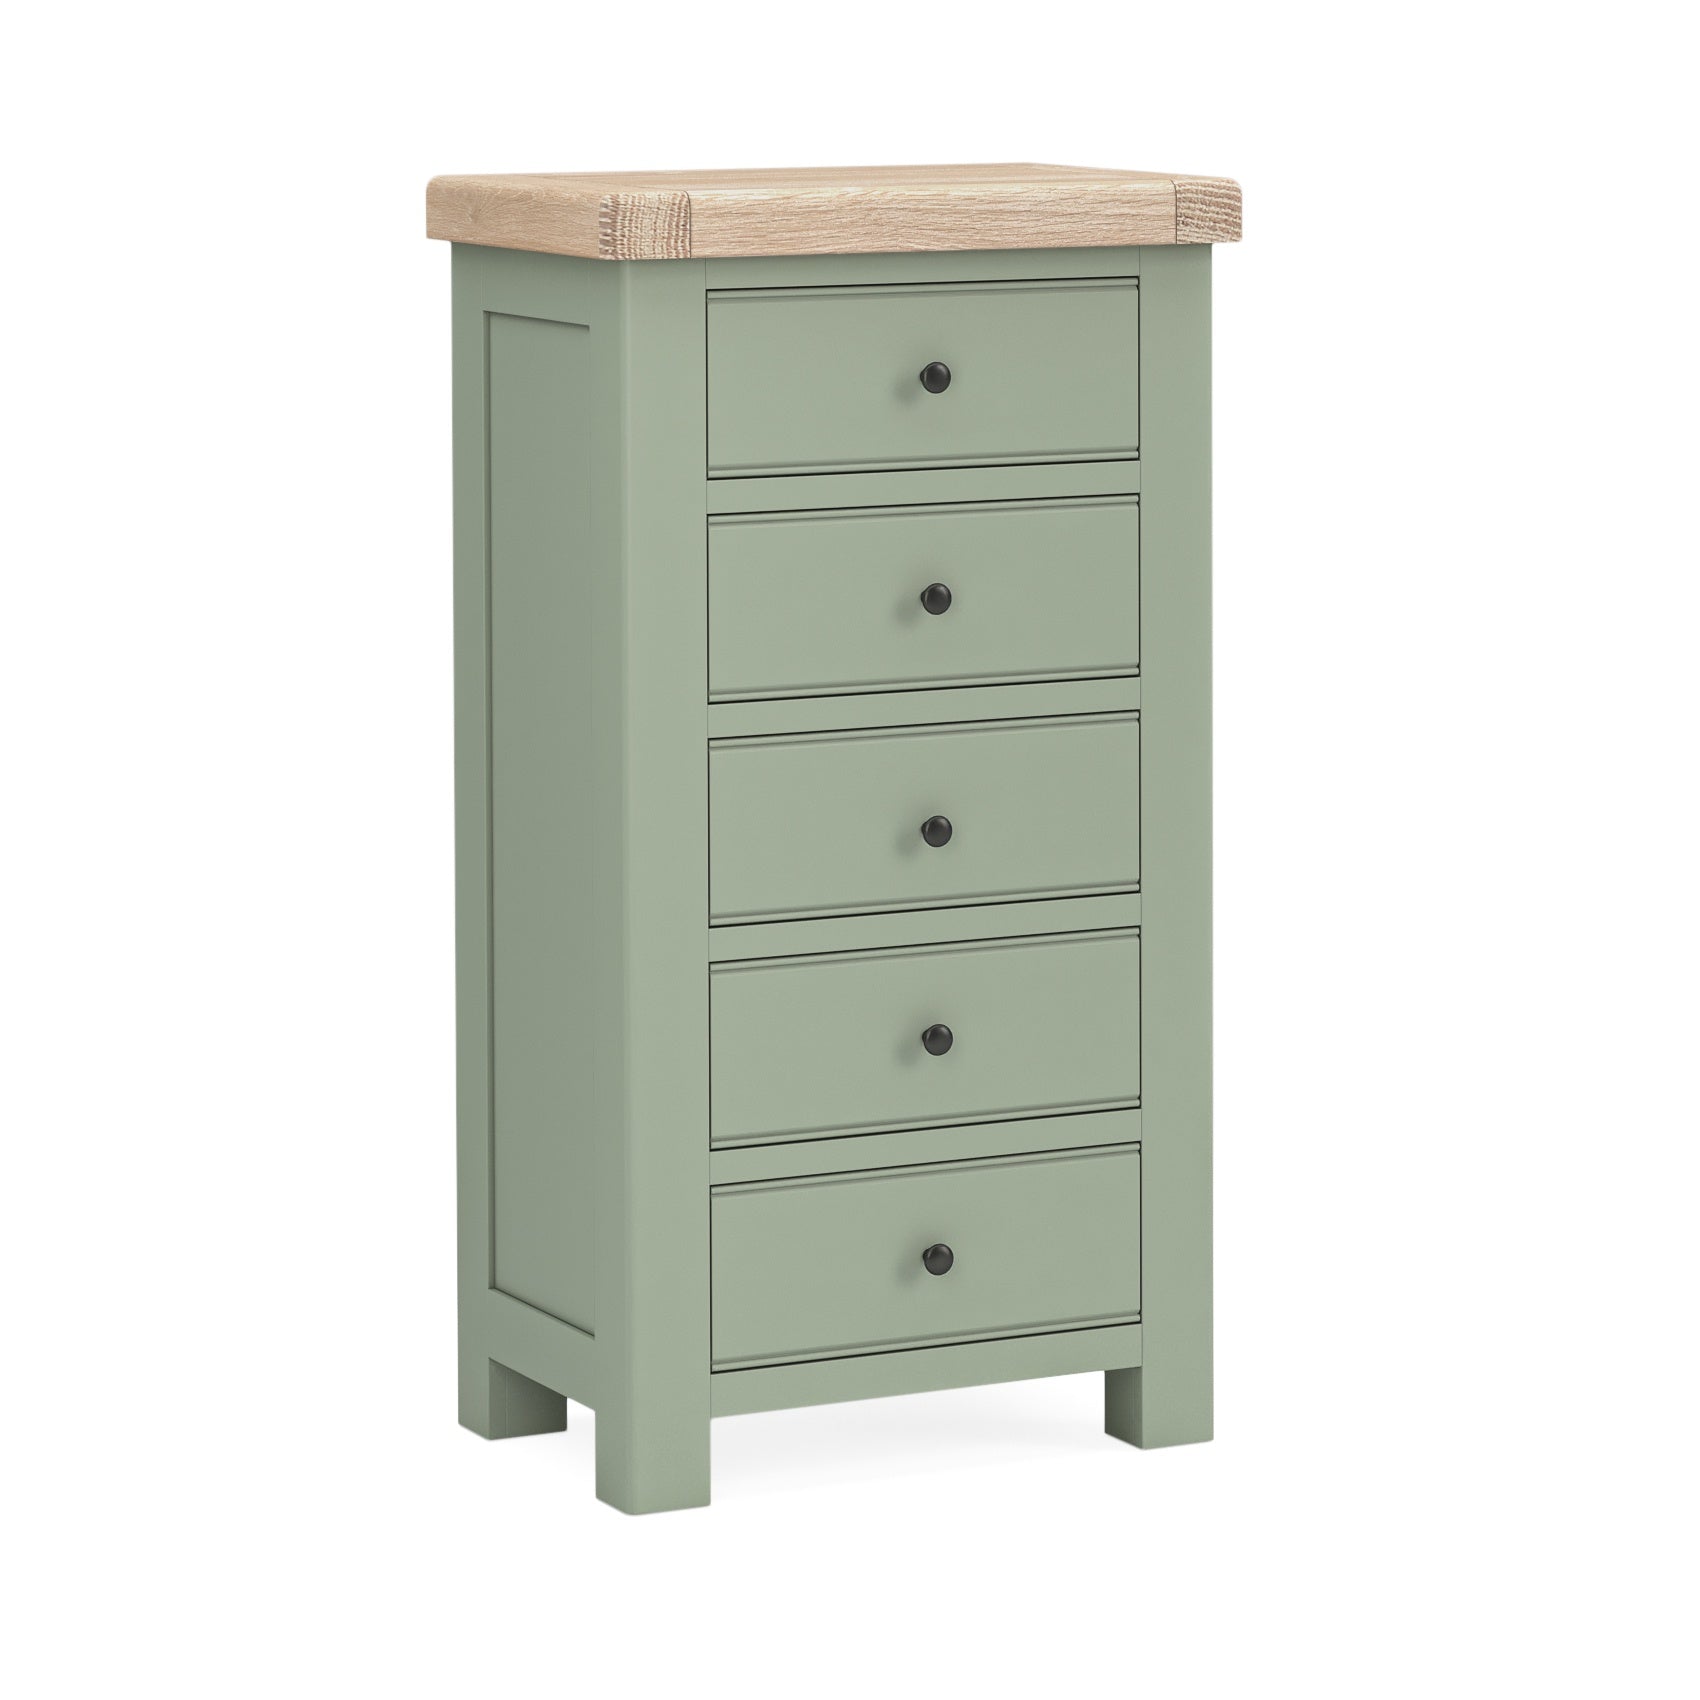 Provence Oak Sage Tallboy Chest Of Drawers.